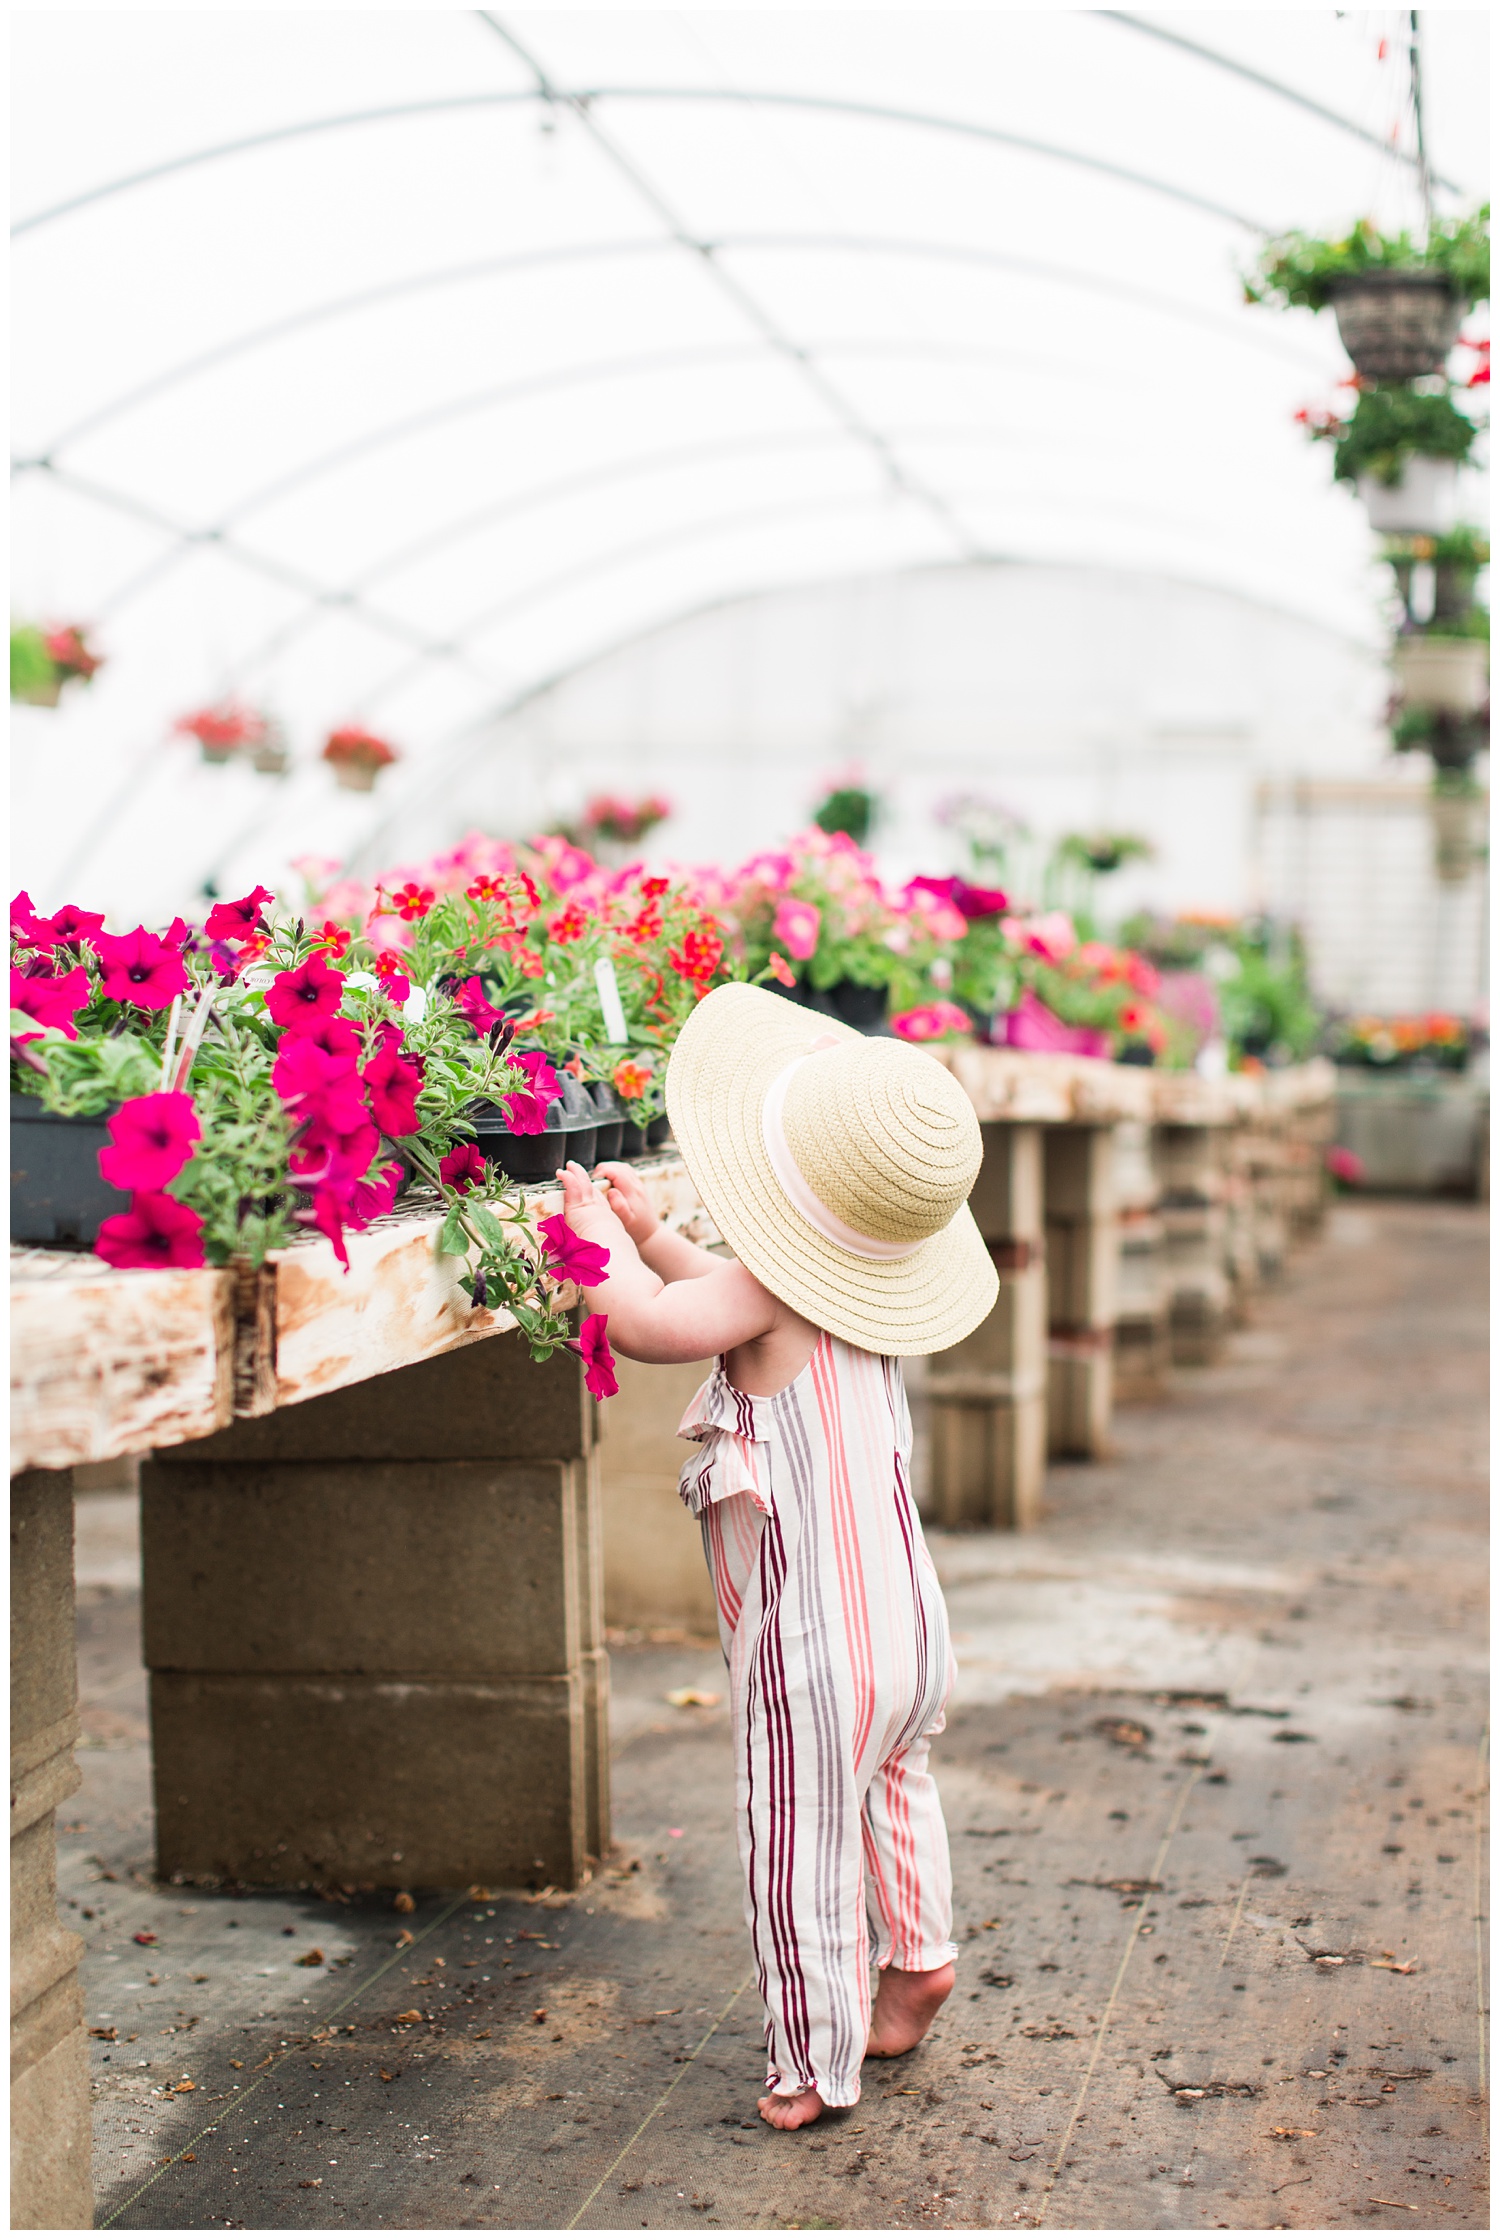 Baby Ivy standing along side florals in a greenhouse wearing a fun floppy hat.